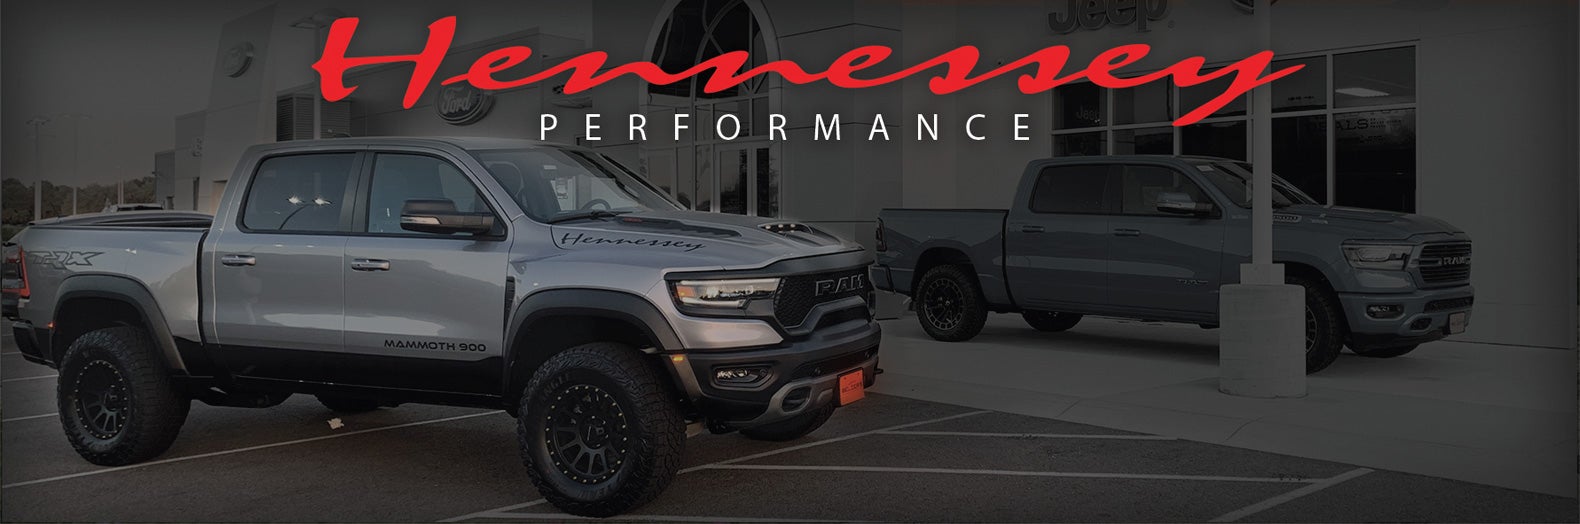 Hennessy Performance | Jeff Belzer's in Lakeville MN